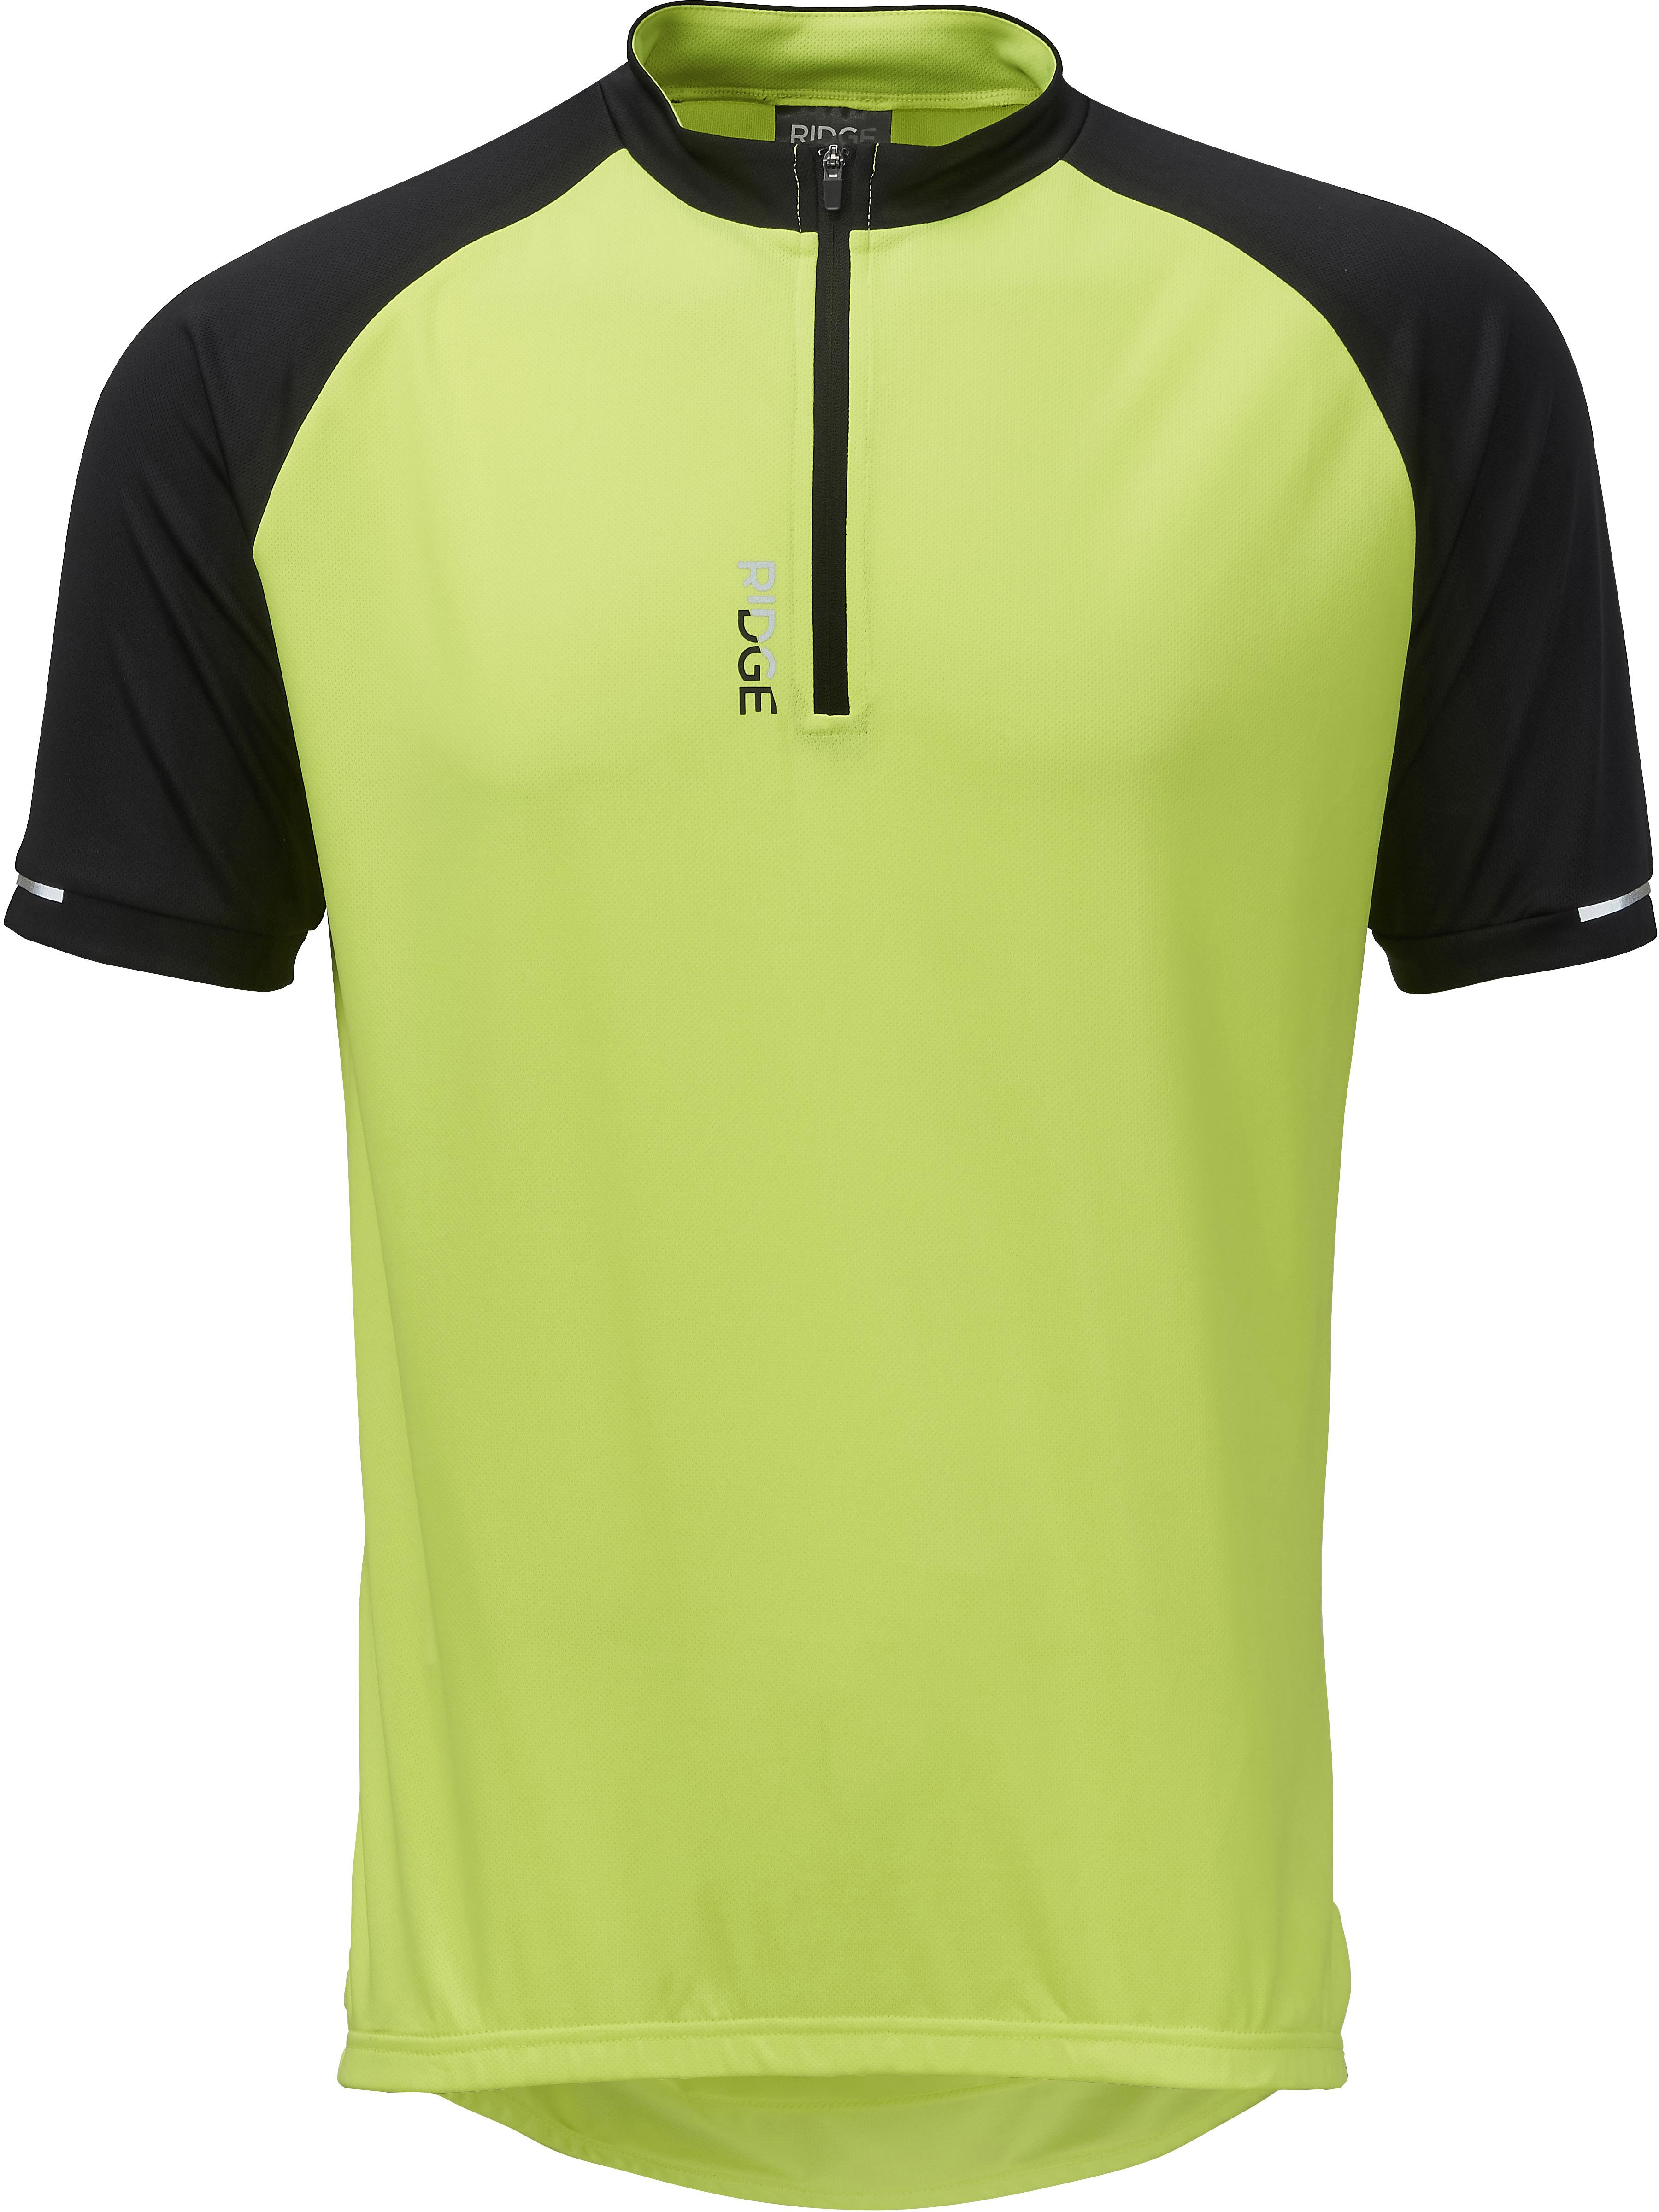 halfords cycling jersey